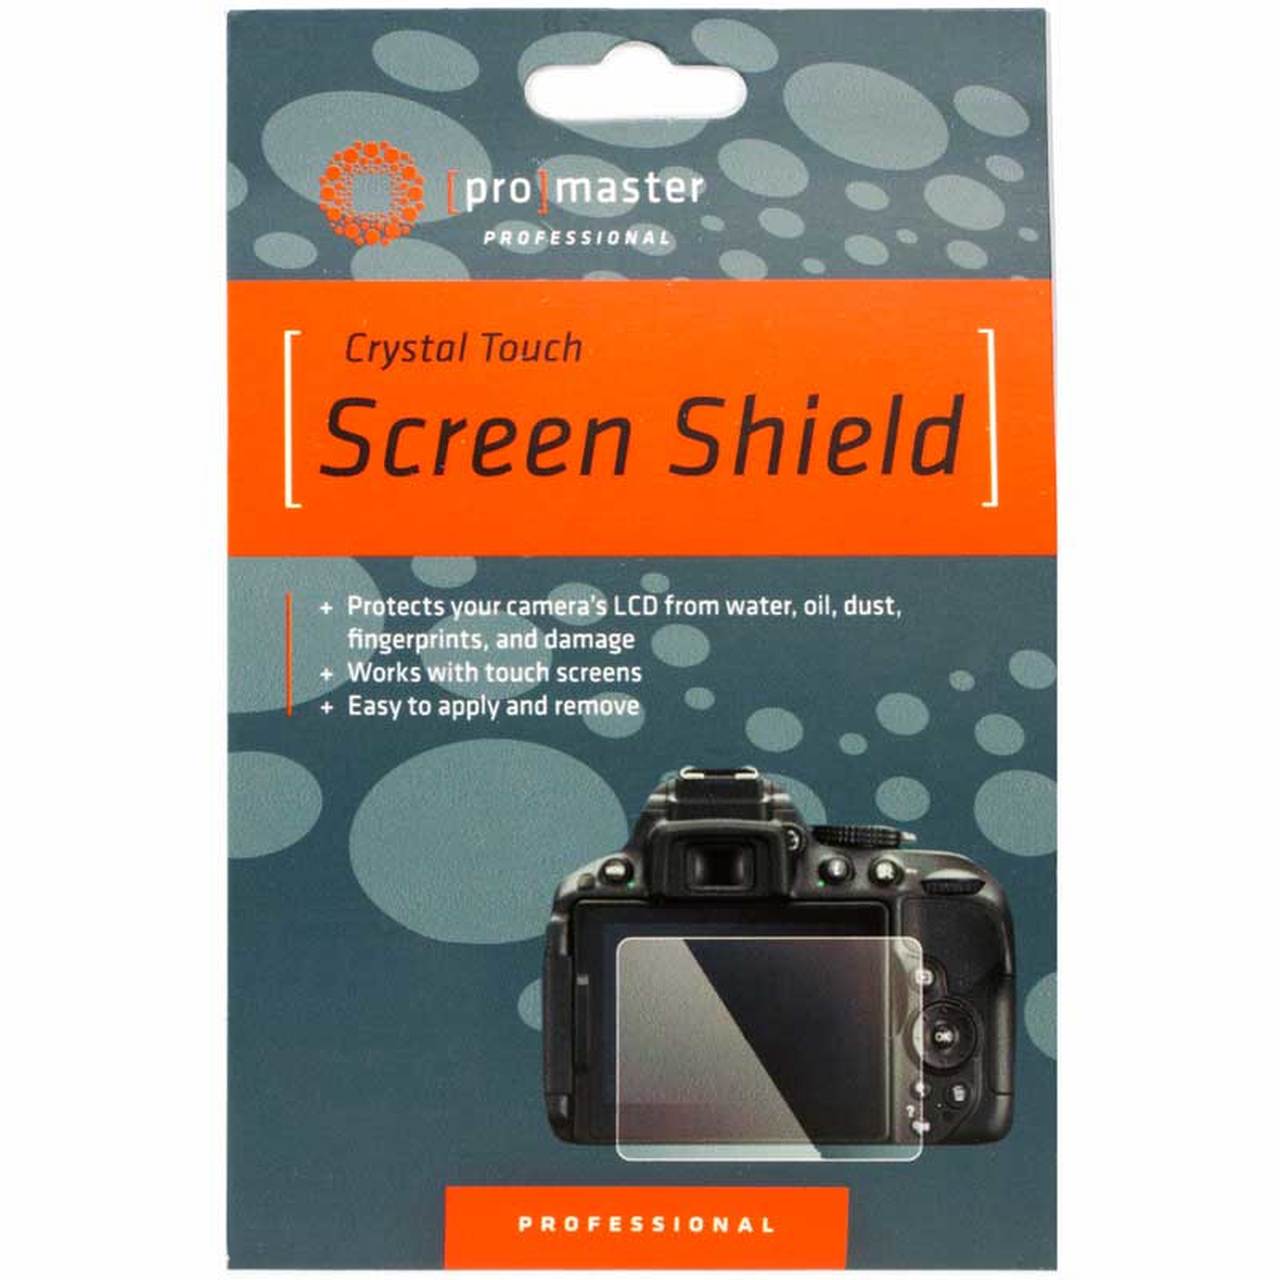 ProMaster 1683 Crystal Touch Screen Shield  Panasonic ZS200 TZ200 LX100, FZ85, LX100II, TX1, TZ85, TZ90, ZS70, Leica D-Lux, D-Lux type 109